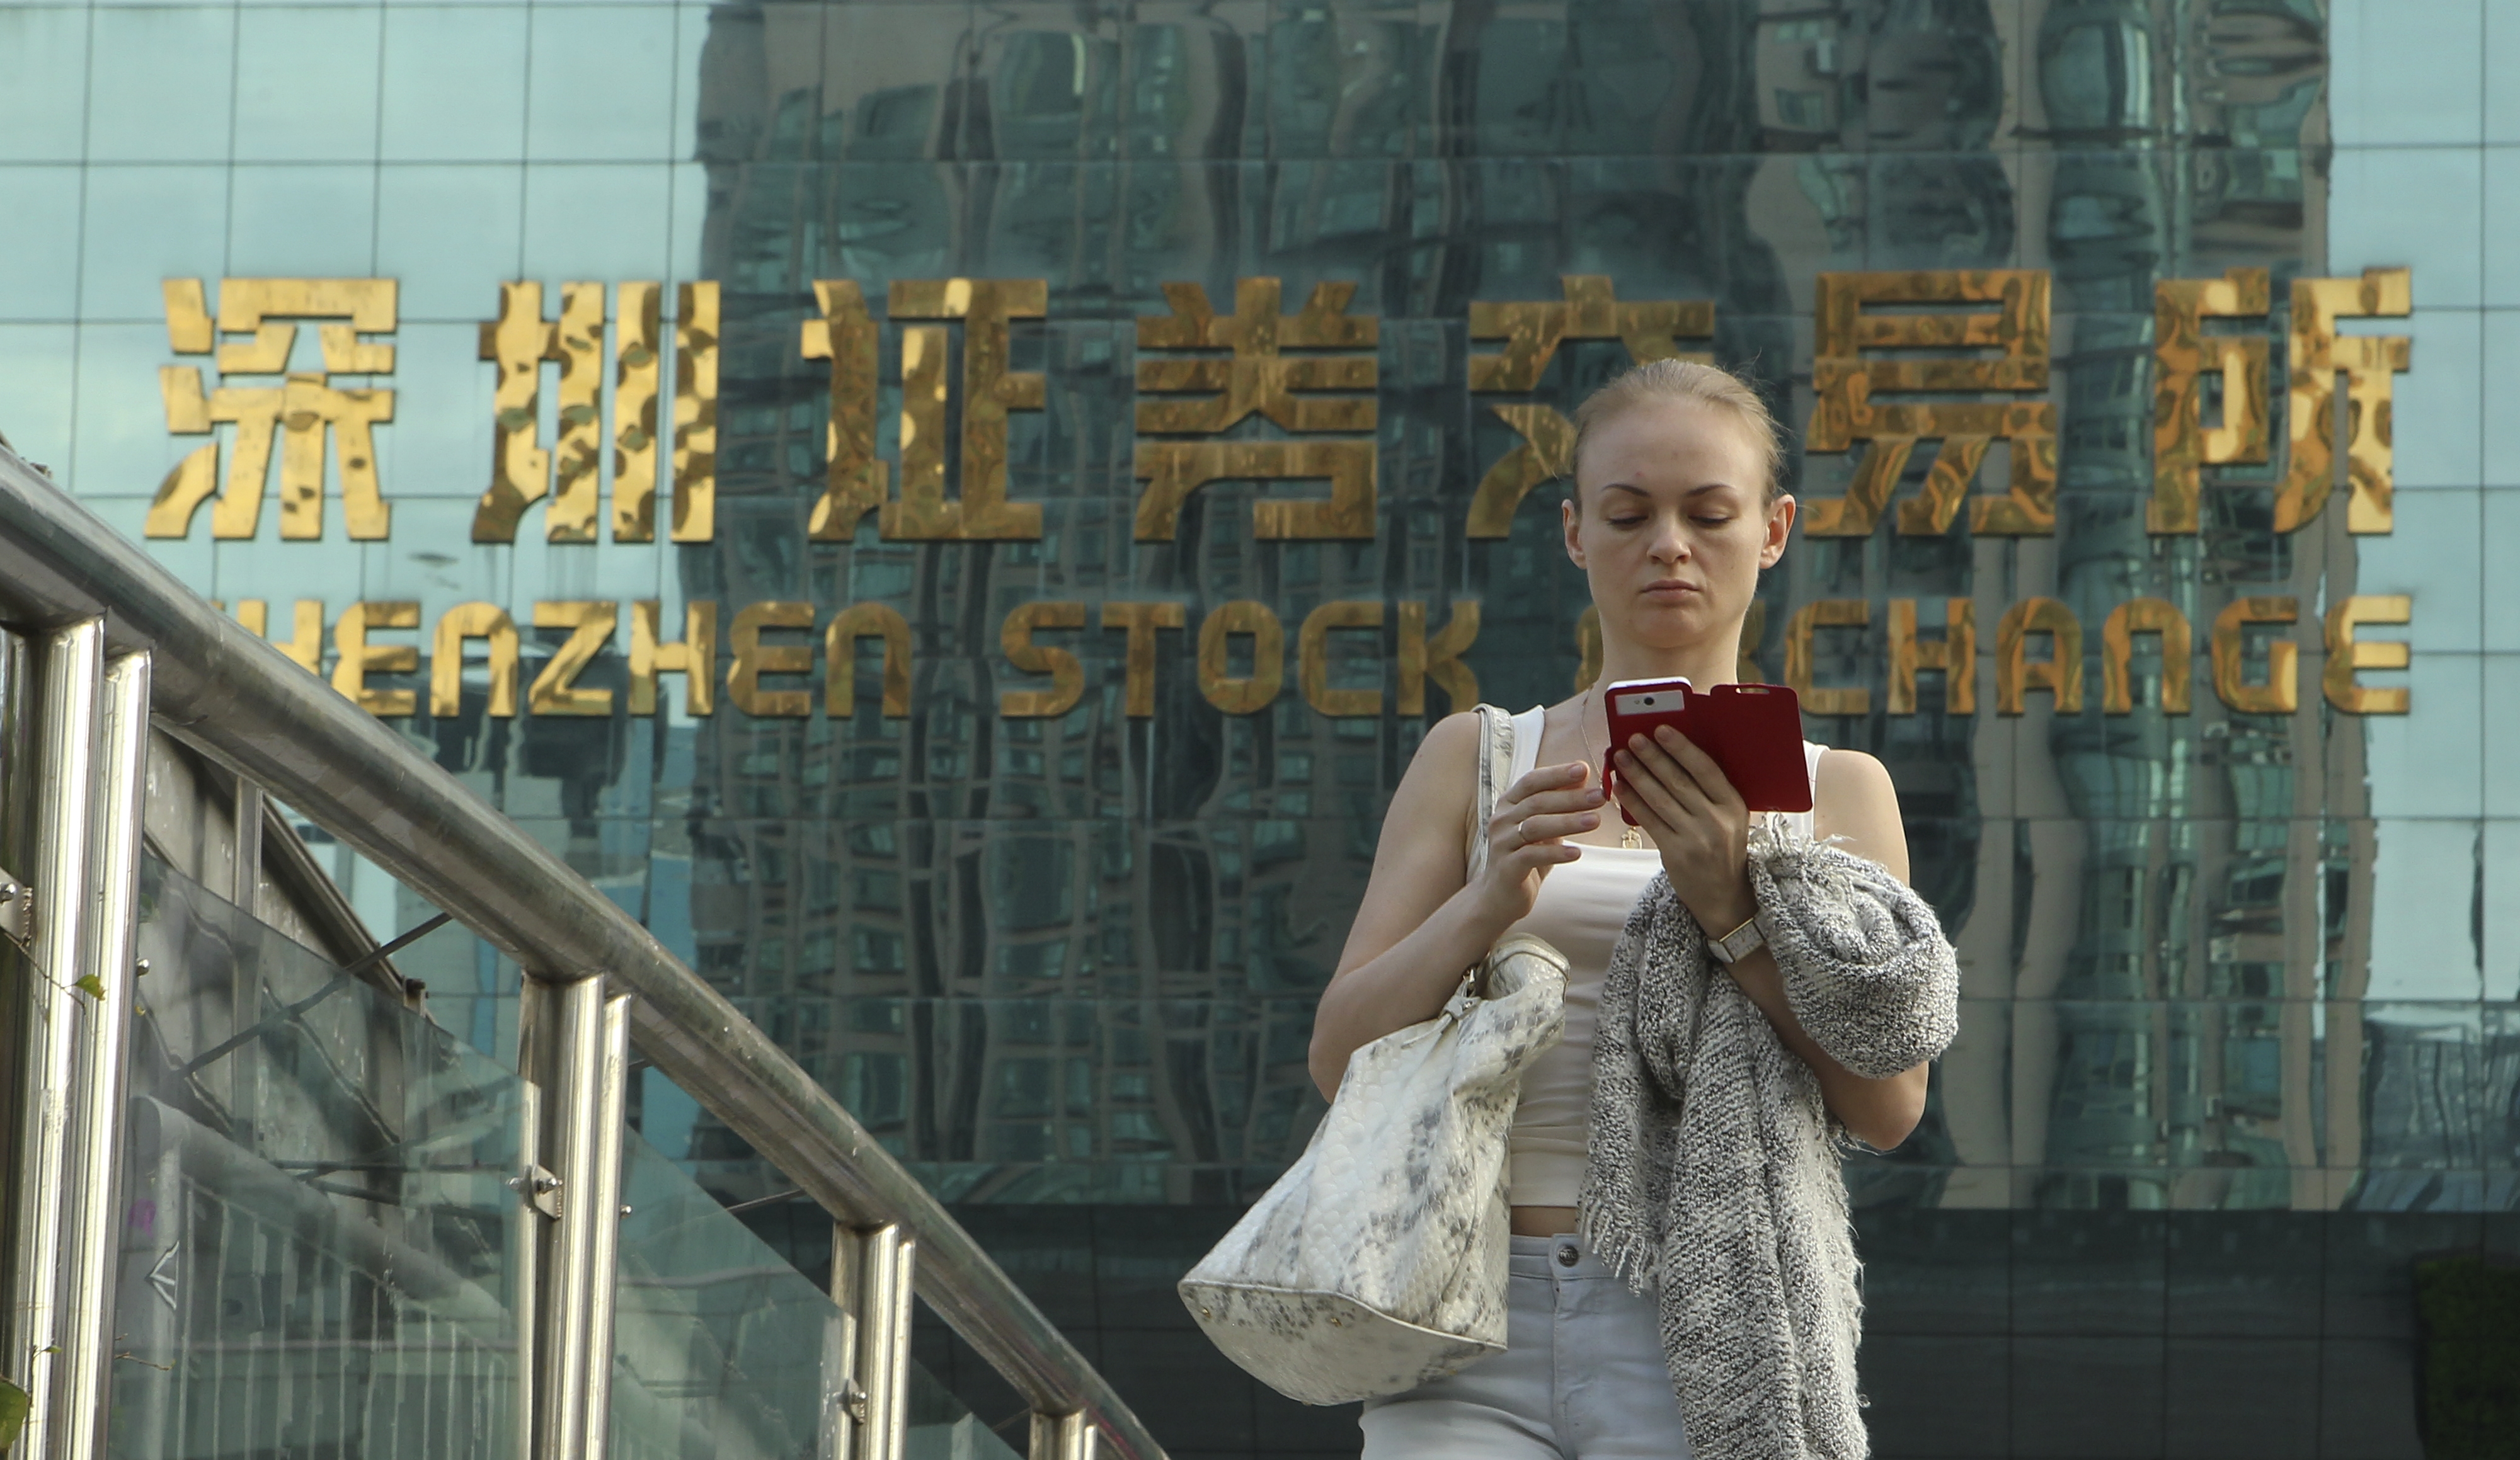 A woman walks away from the Shenzhen stock exchange as markets in mainland China and Hong Kong may continue to see downside risks in the days ahead. Photo: ImagineChina